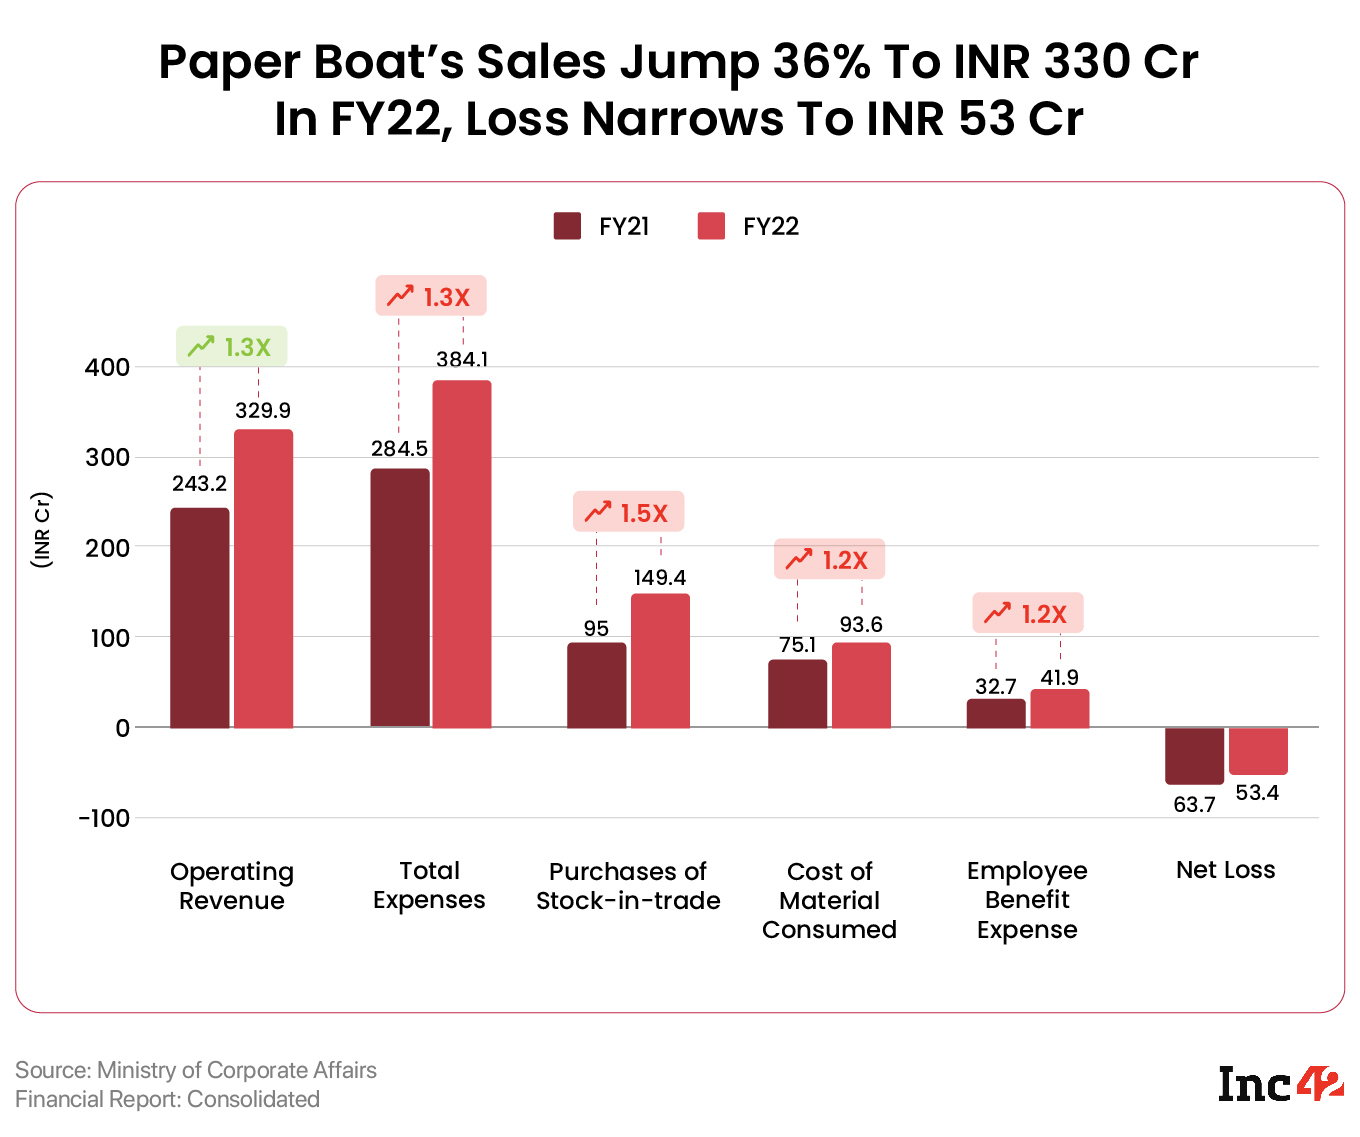 Paper Boat’s Sales Jump 36% To INR 330 Cr In FY22, Loss Narrows To INR 53 Cr